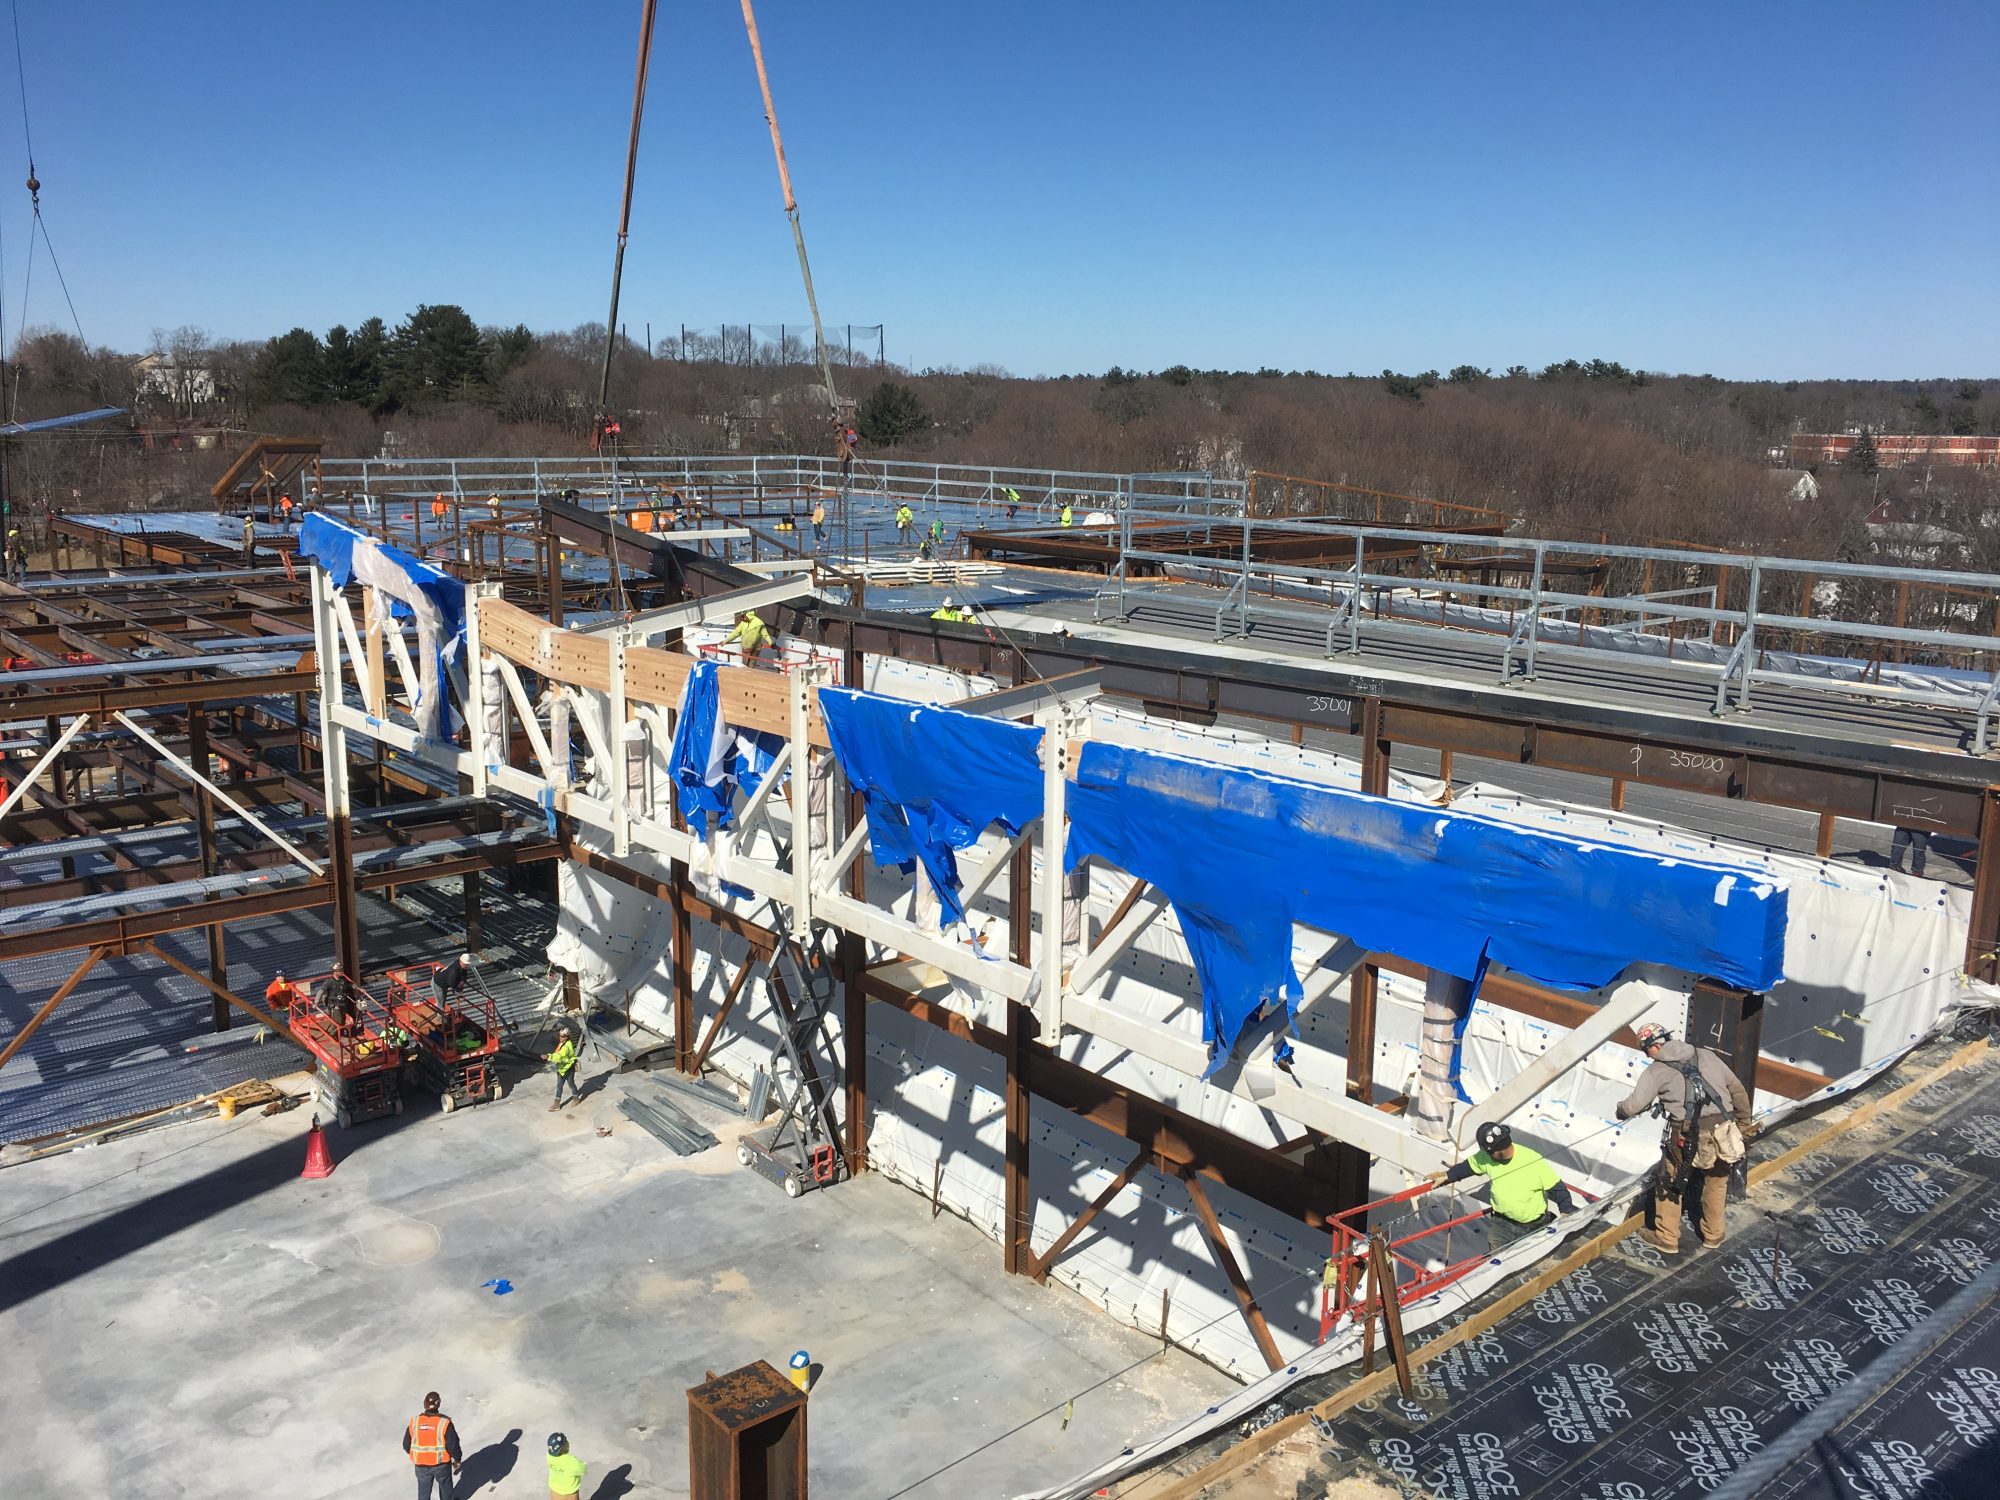 The construction team behind the new Saugus Middle-High School finished installing trusses to build the school's gymnasium Monday afternoon. The first truss was installed by PMA Consultants on March 26.